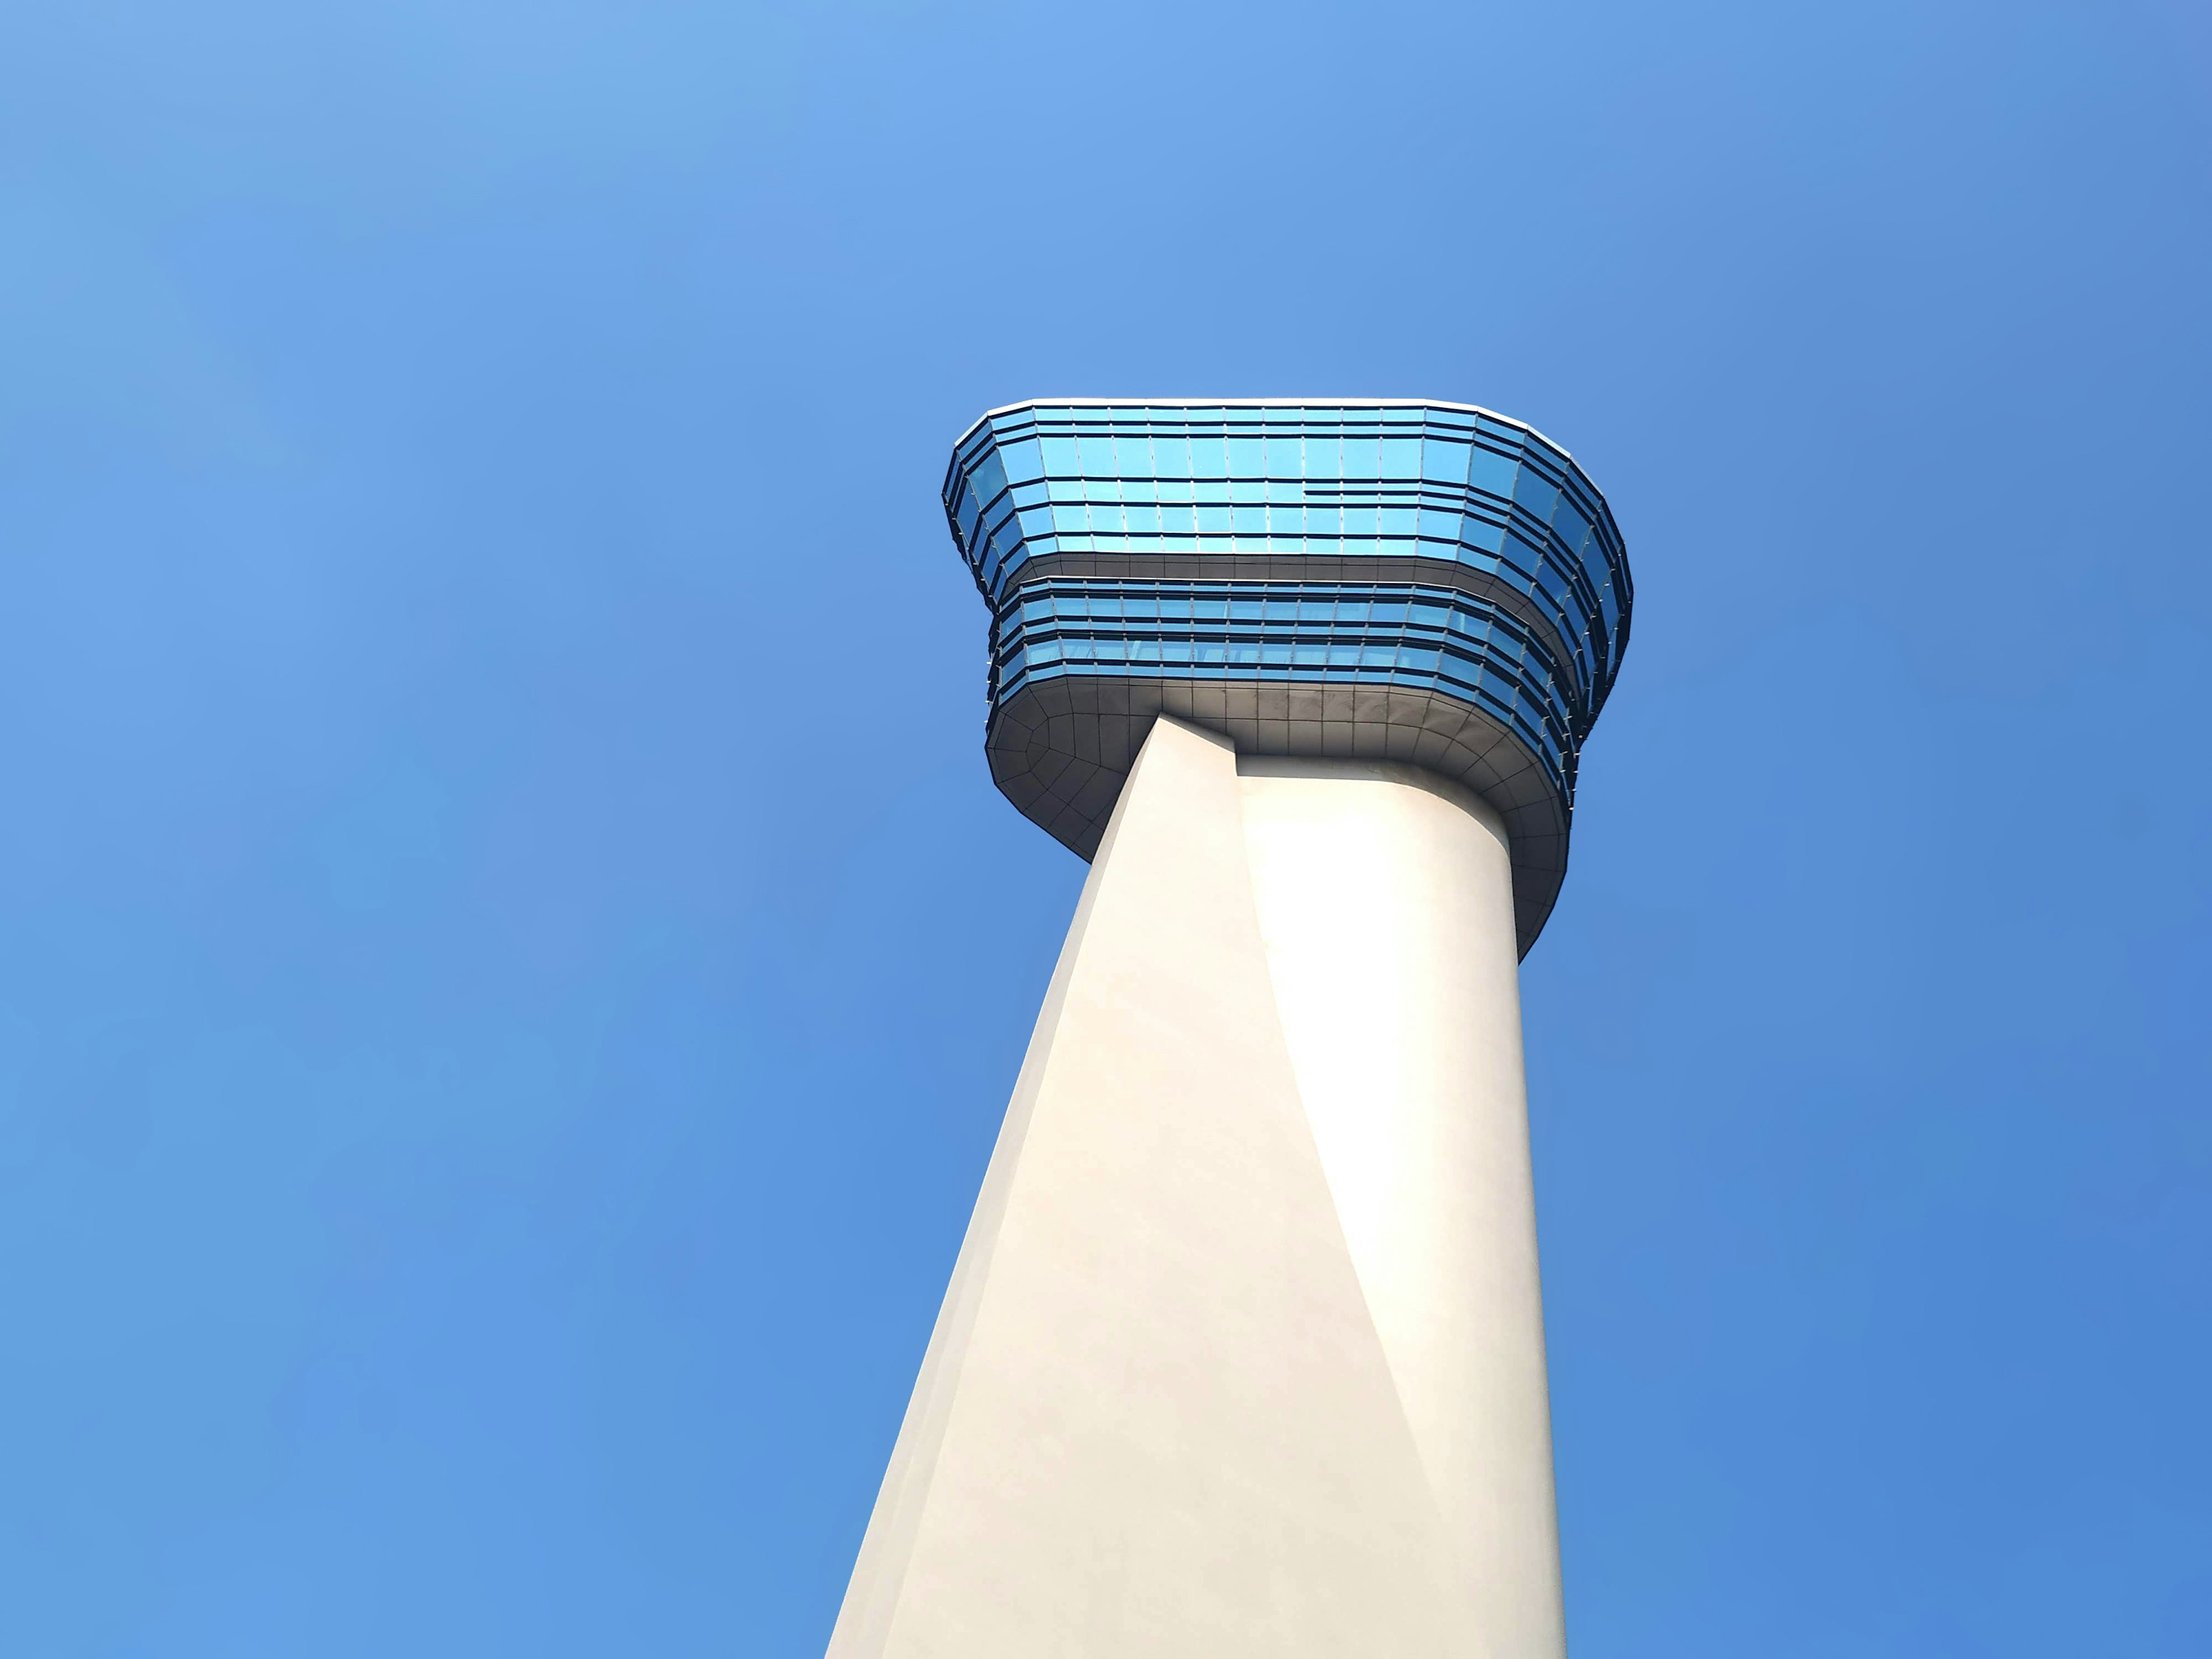 Air Traffic Tower Placeholder Image